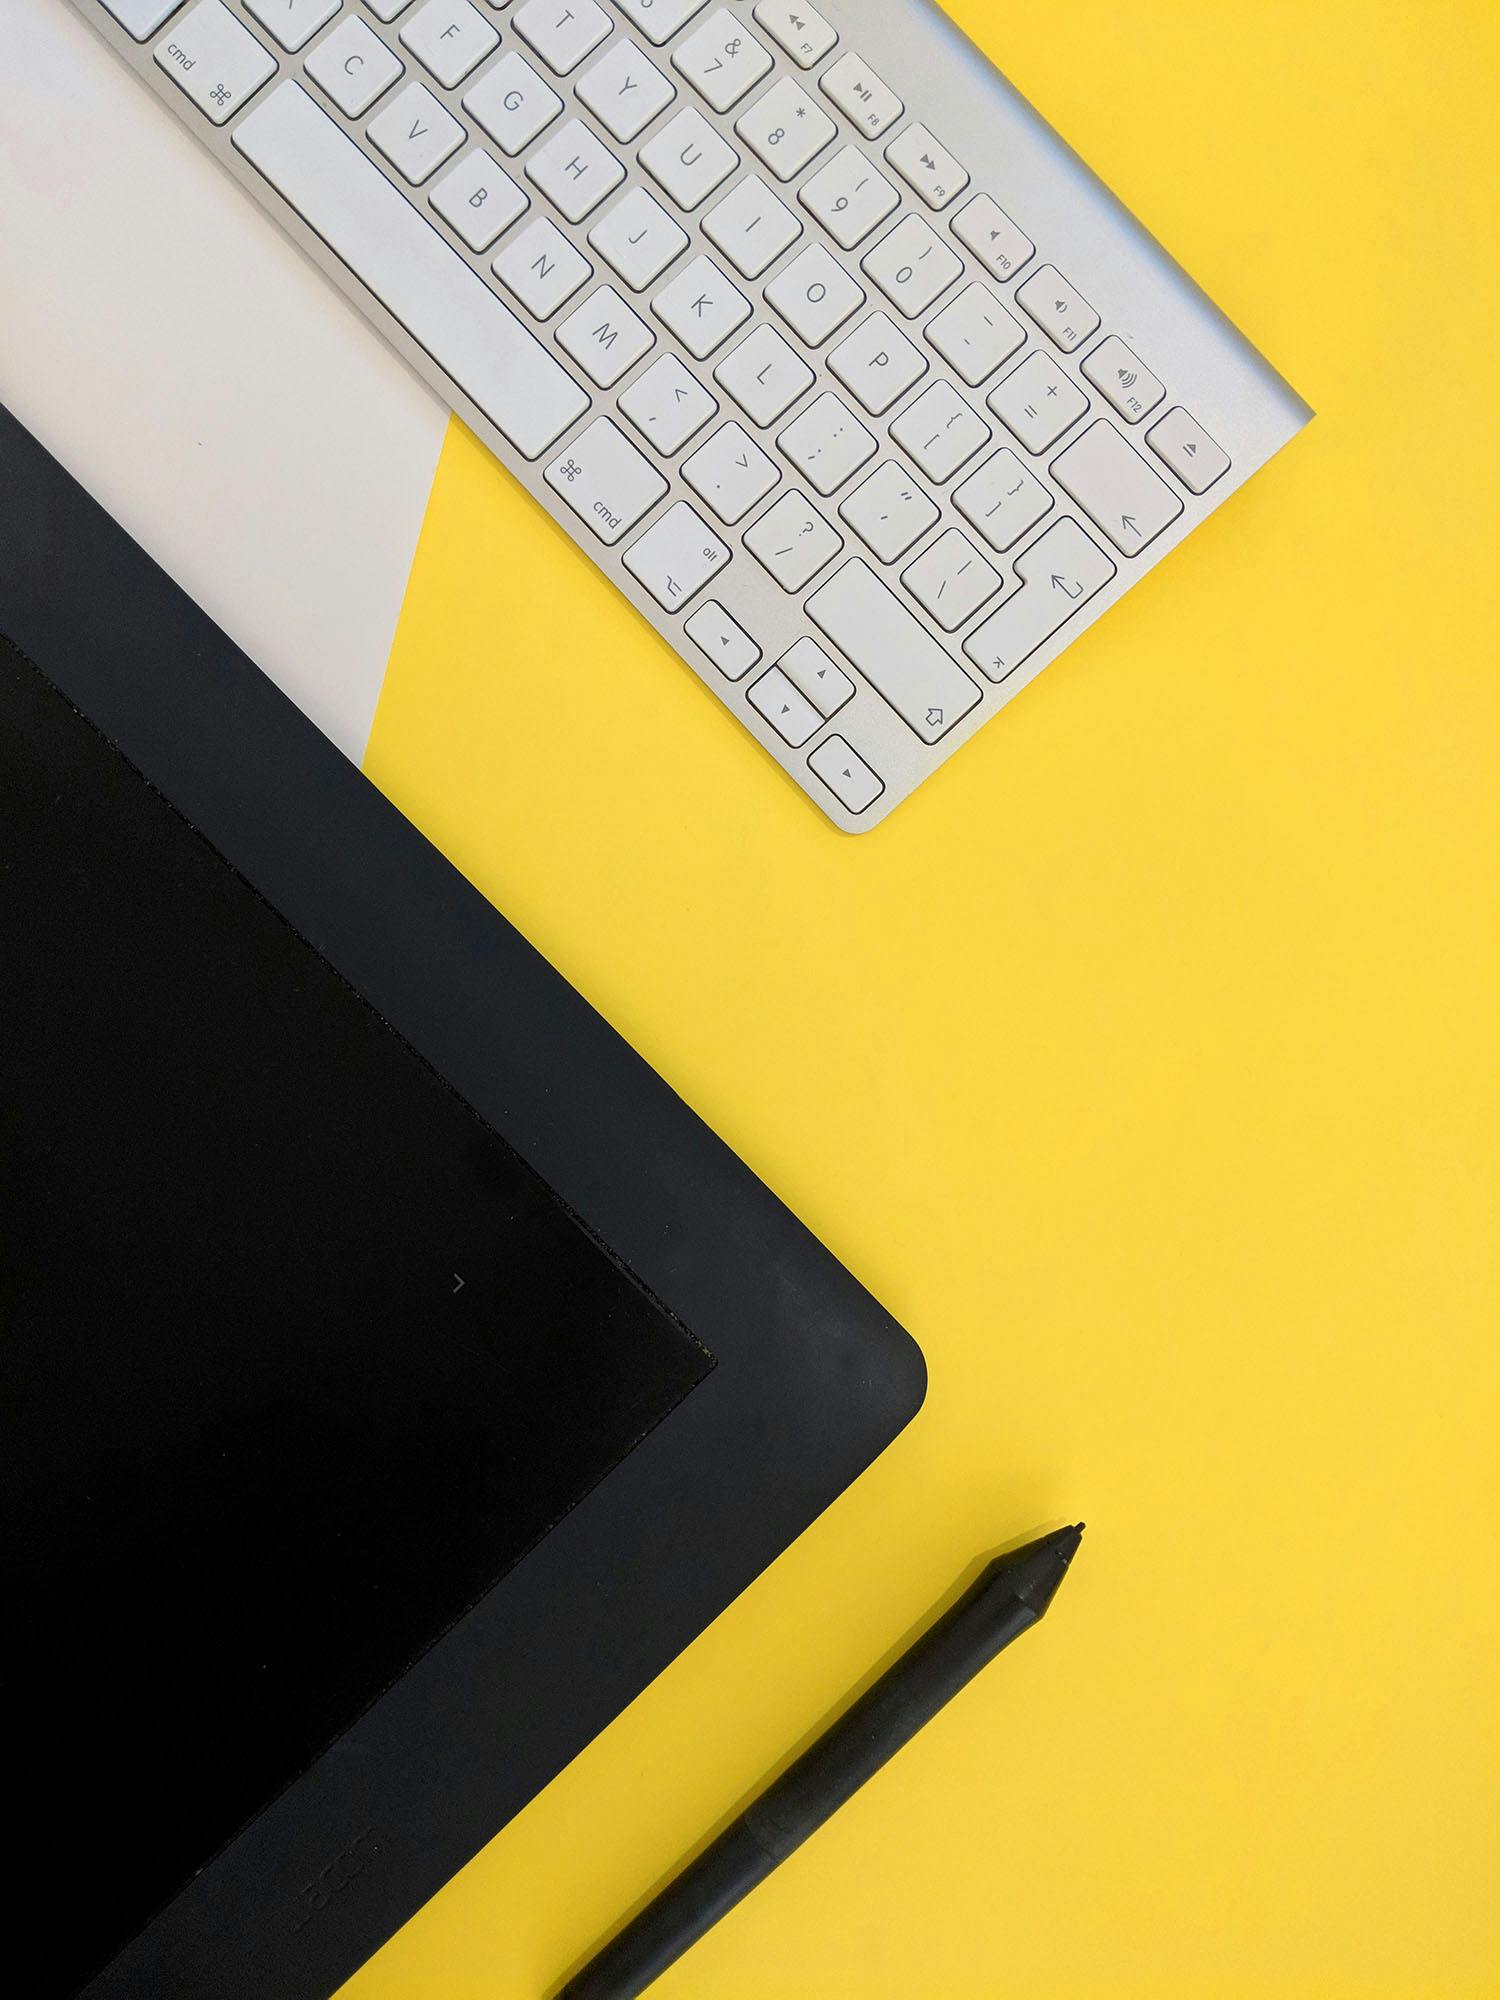 Tablet and keyboard on yellow desk